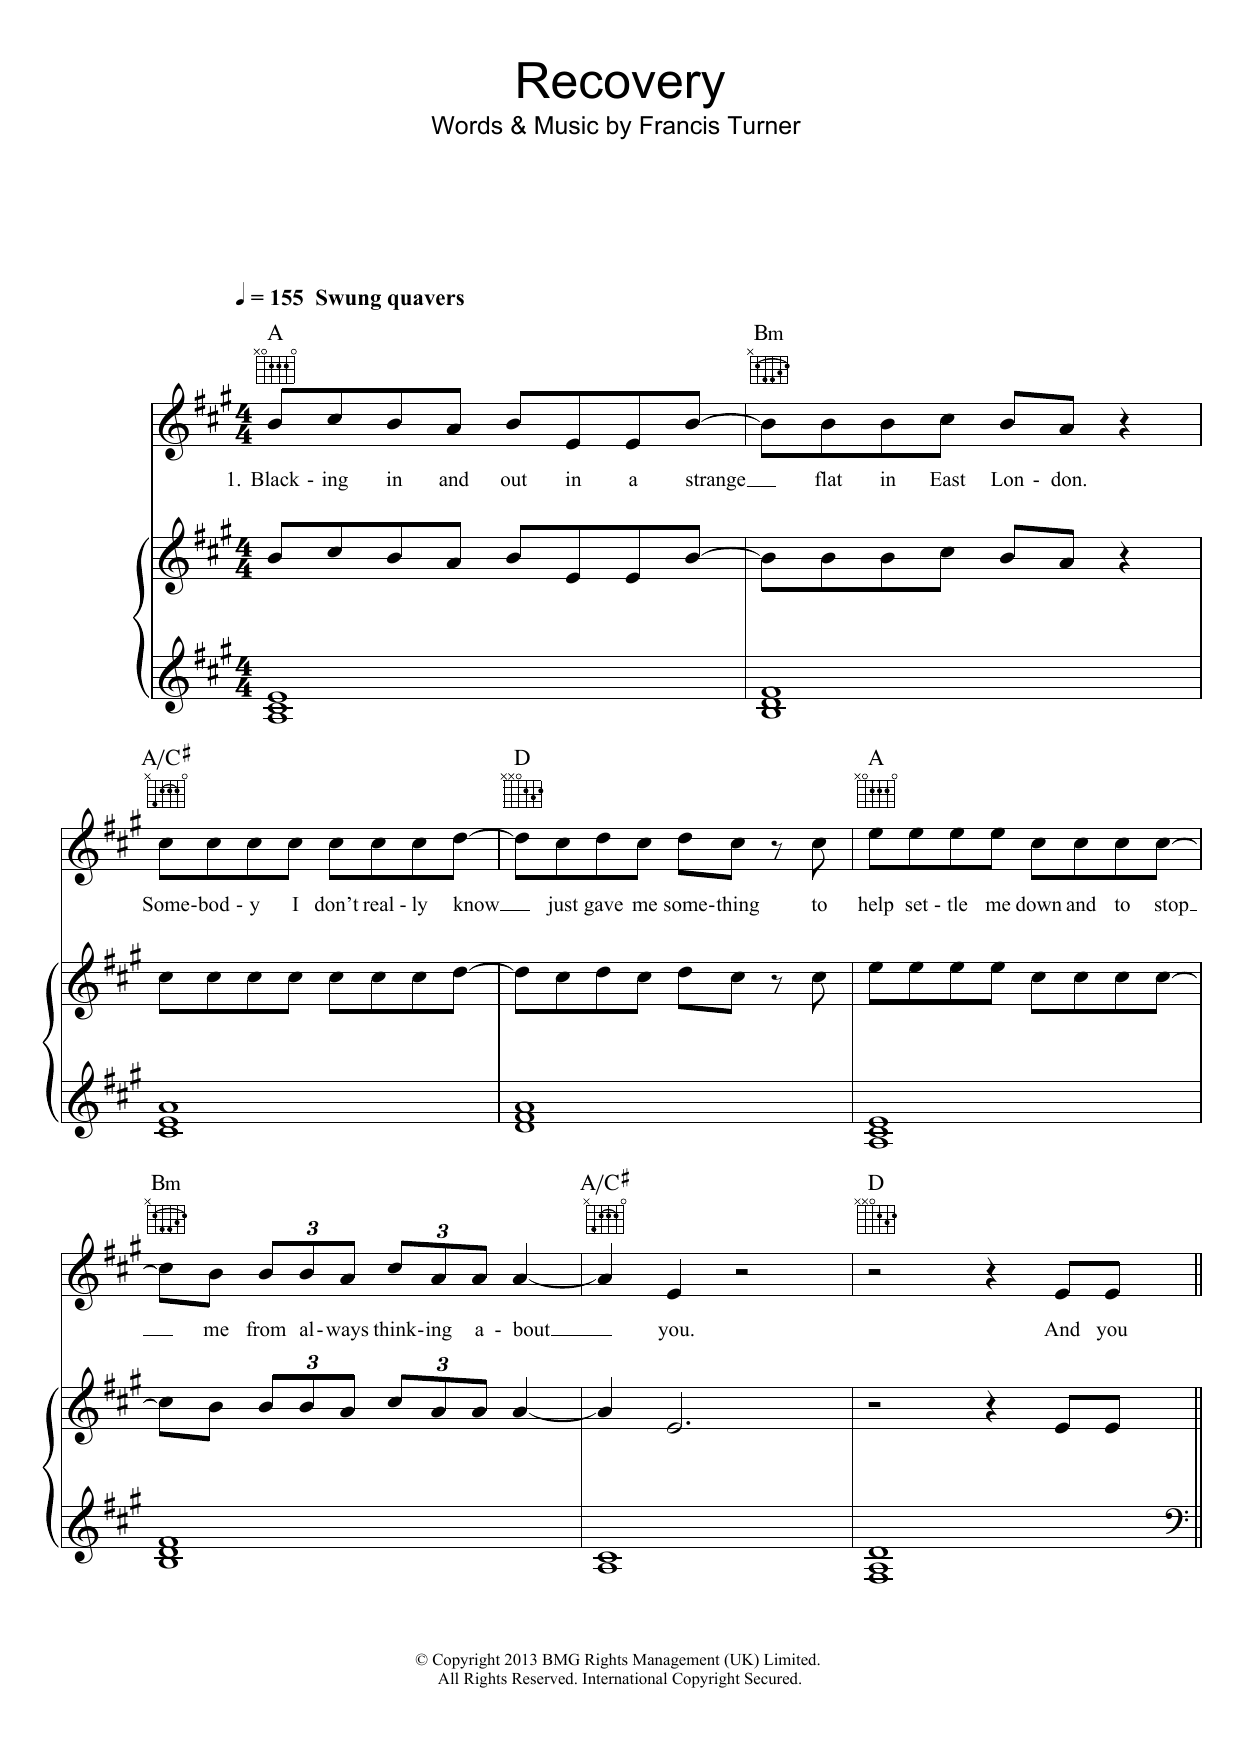 Download Frank Turner Recovery Sheet Music